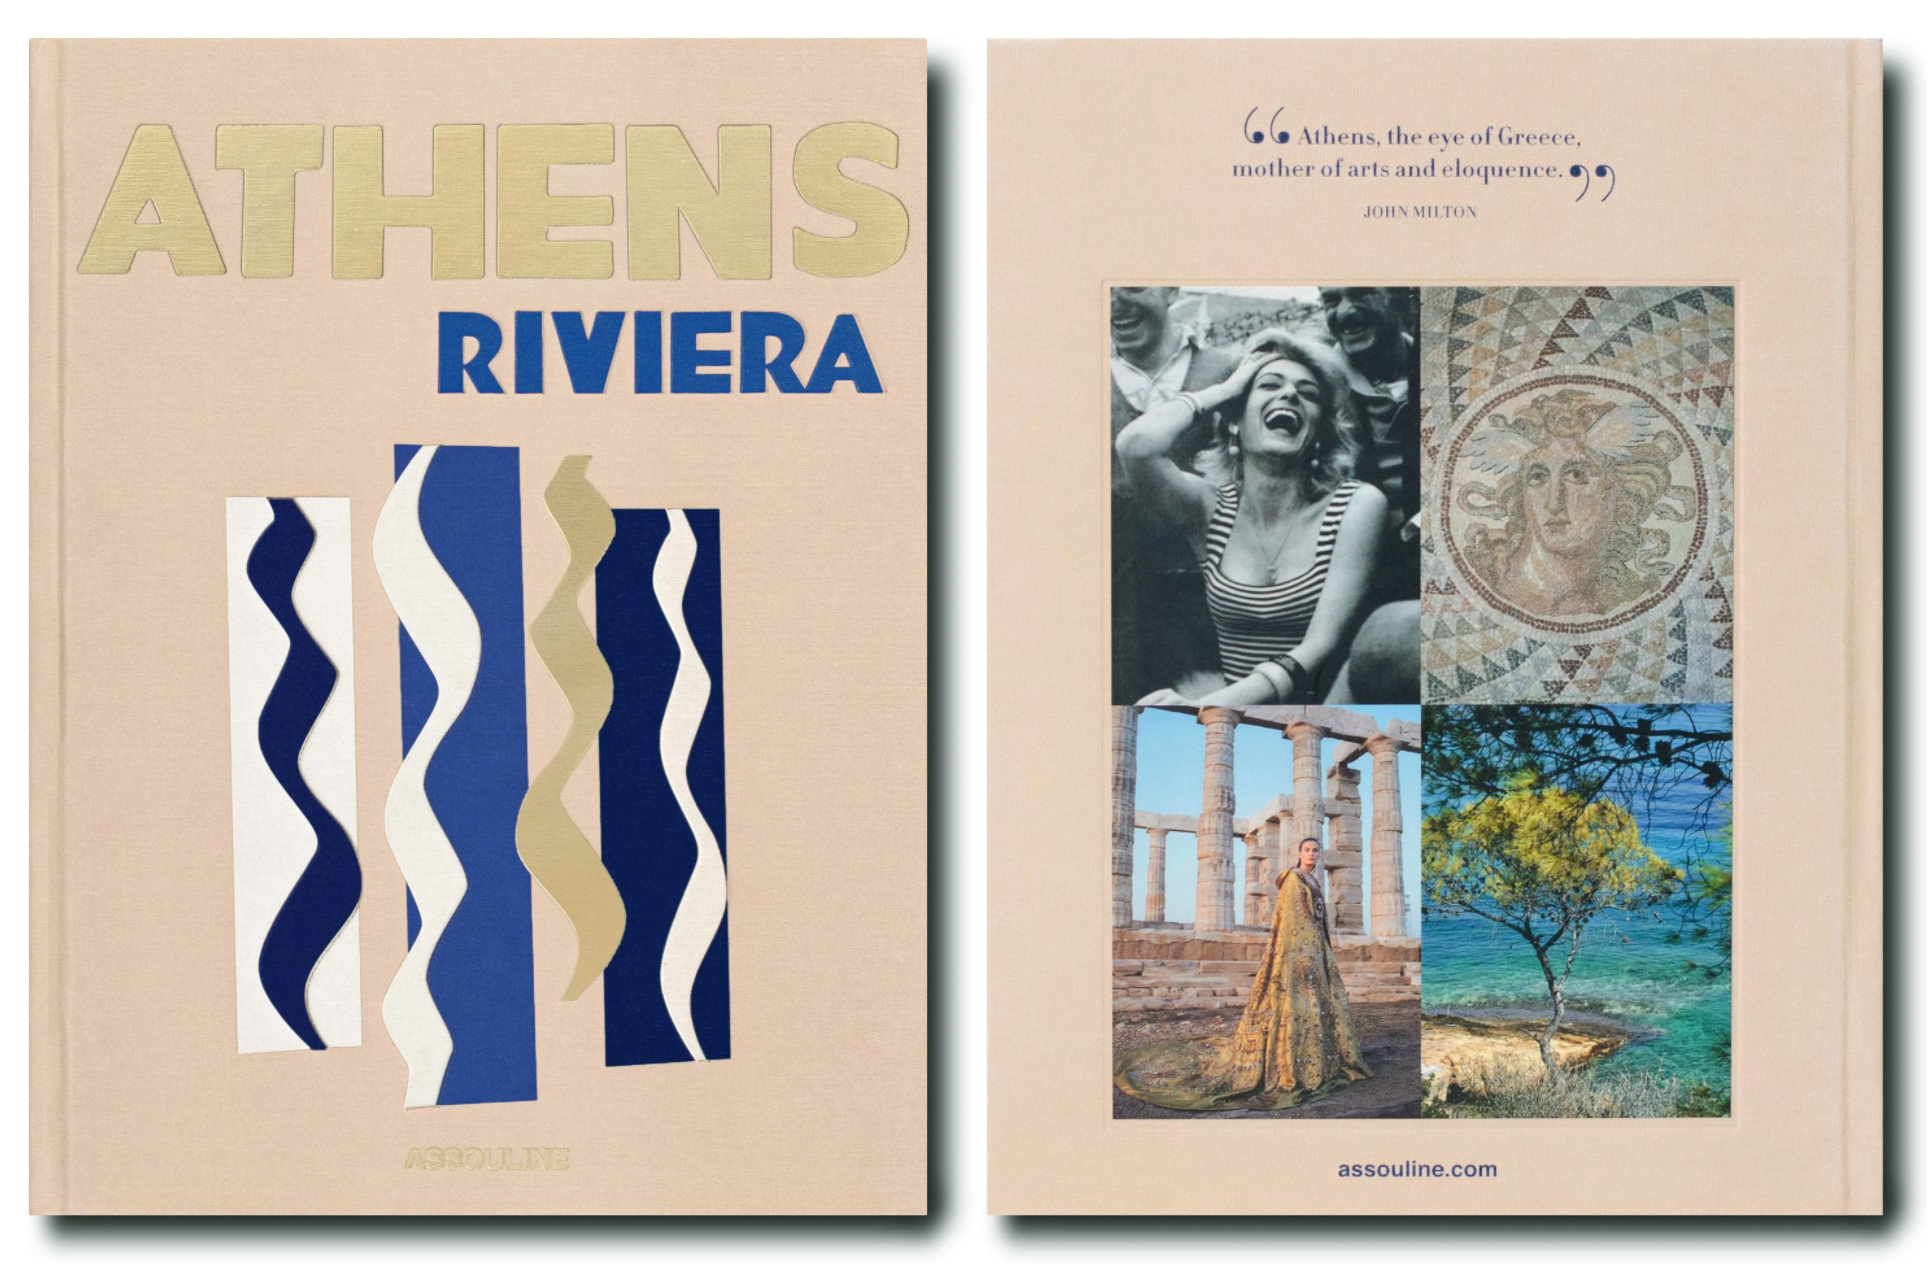 Athens Riviera by Stéphanie Artarit published by ASSOULINE. ISBN: 9781614289463